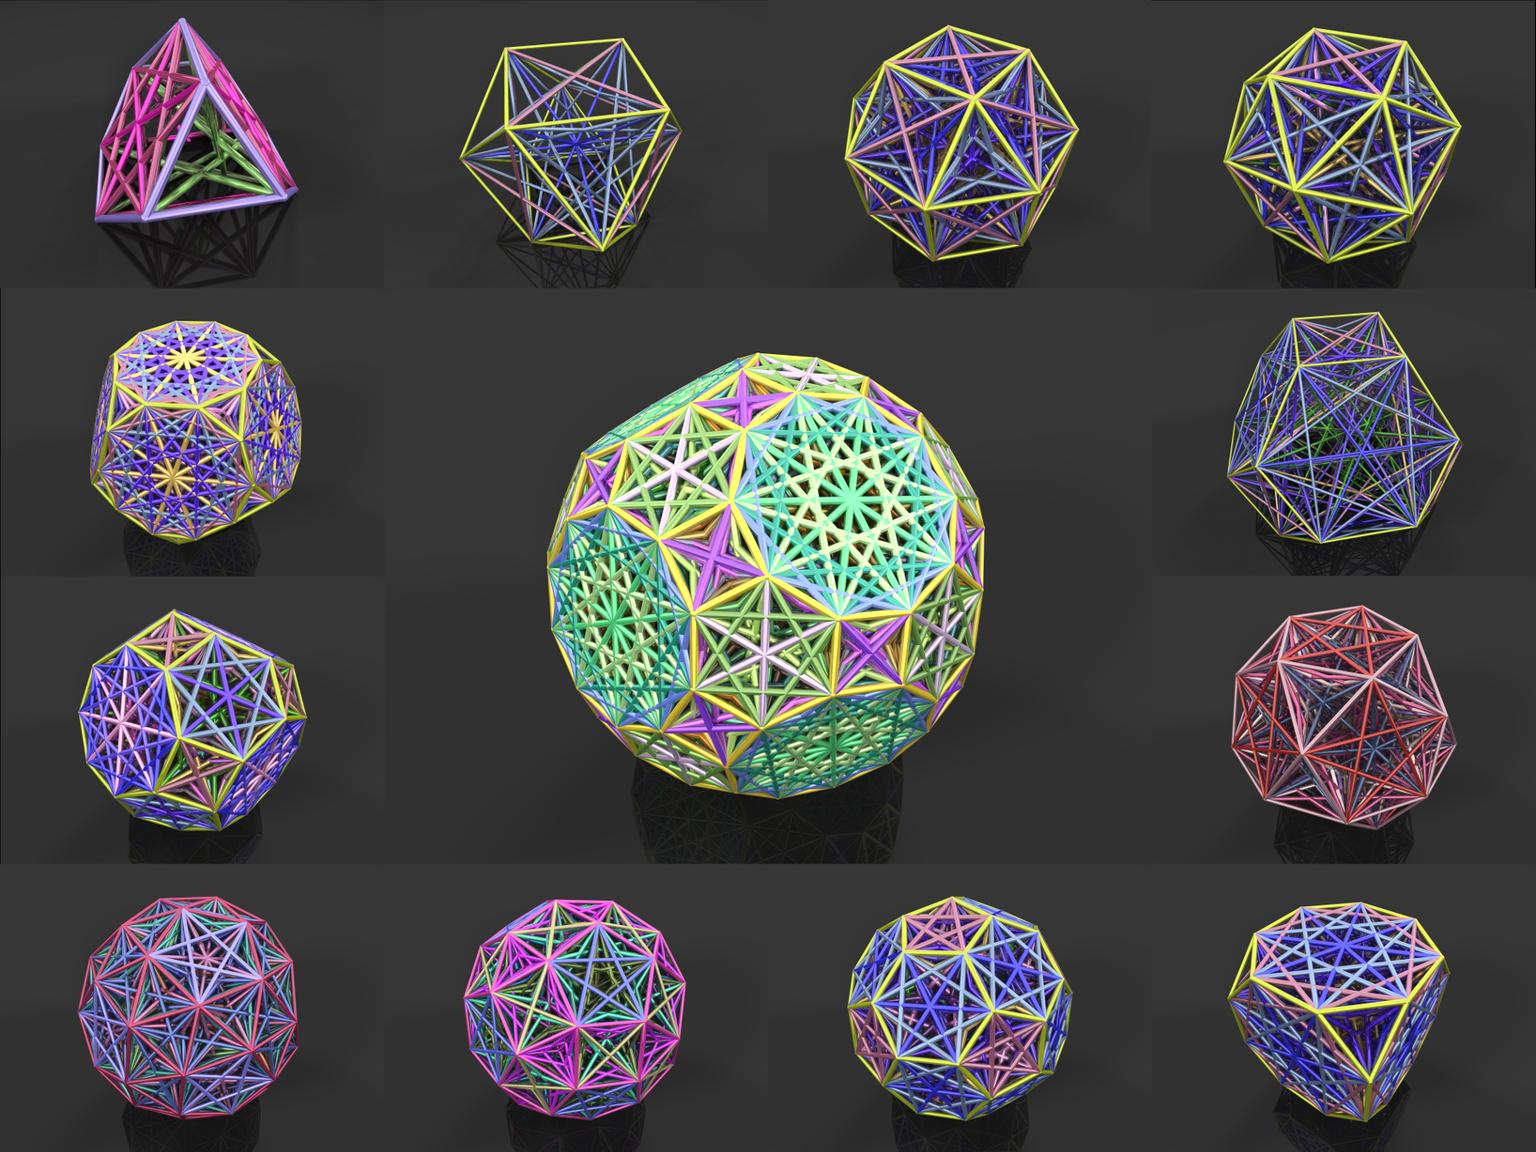 Image for entry 'All the Edges of all the Archimedean Solids'